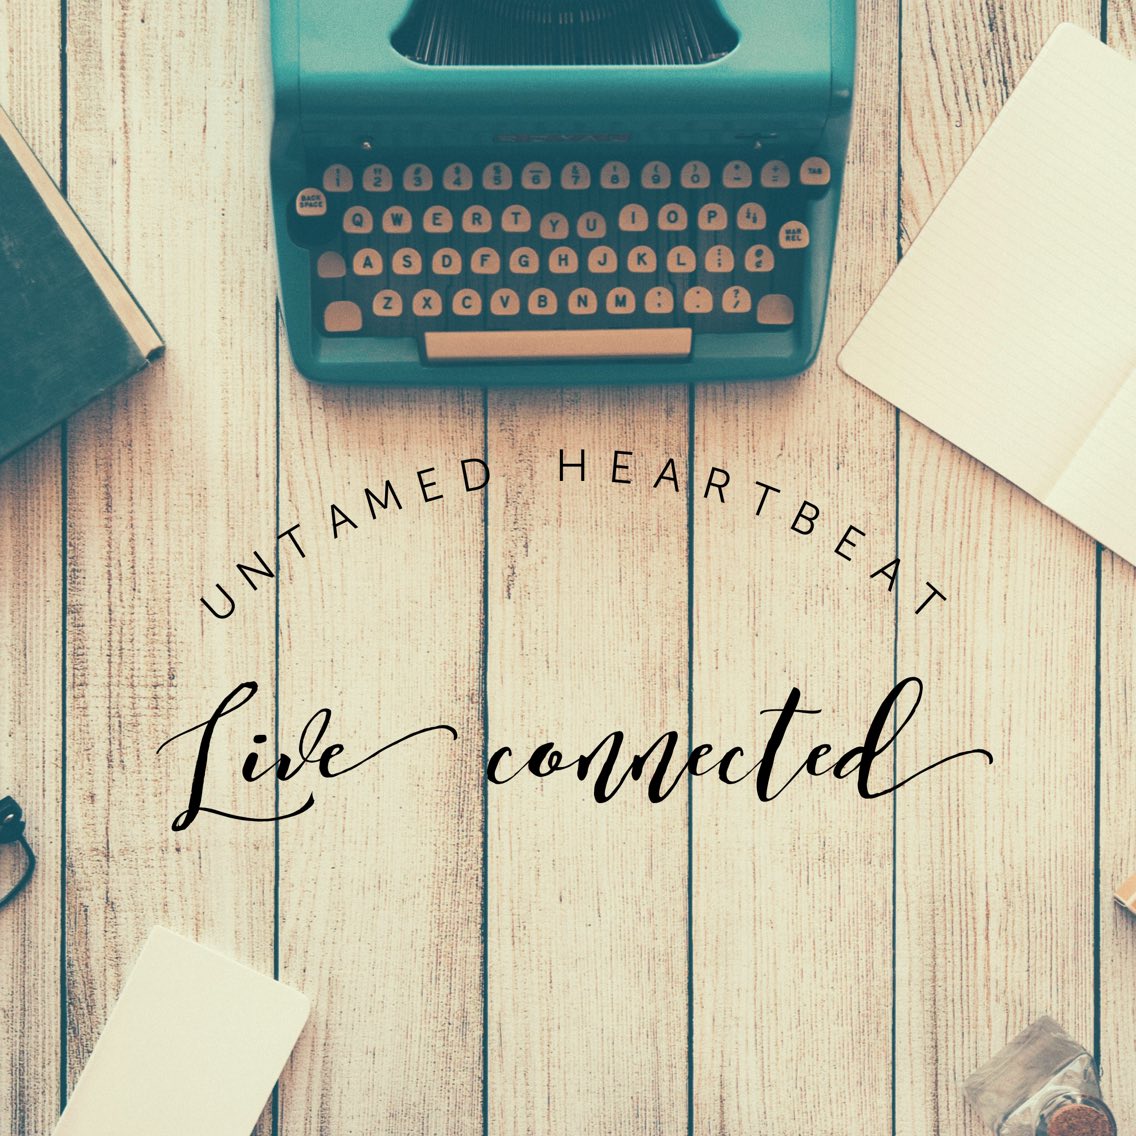 Untamed Heartbeat: Live Connected